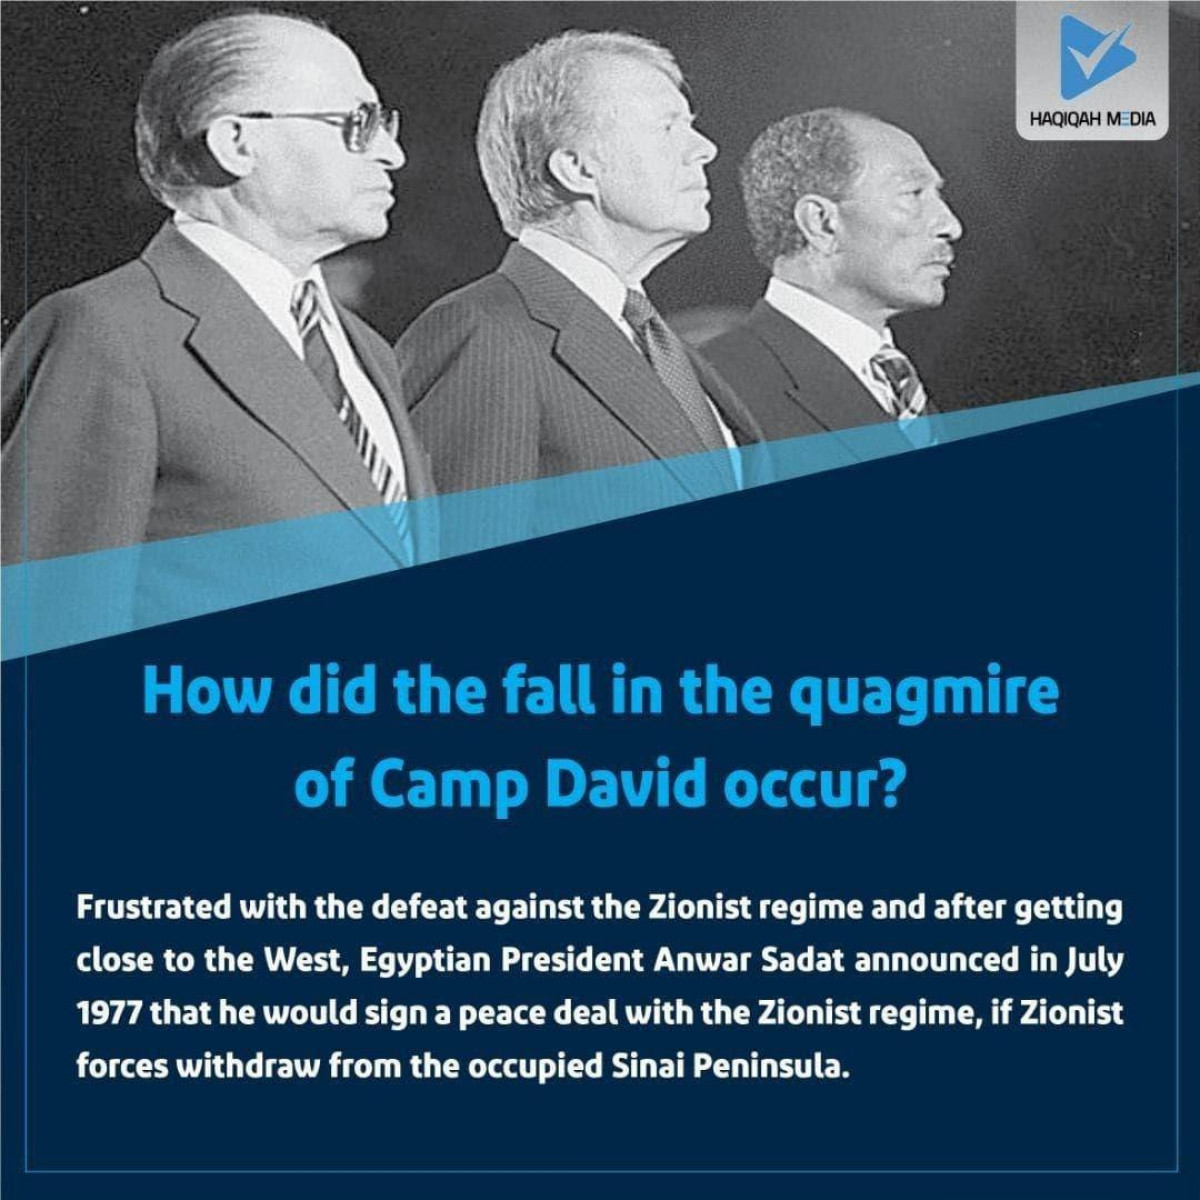 How did the fall in the quagmire of Camp David occur?